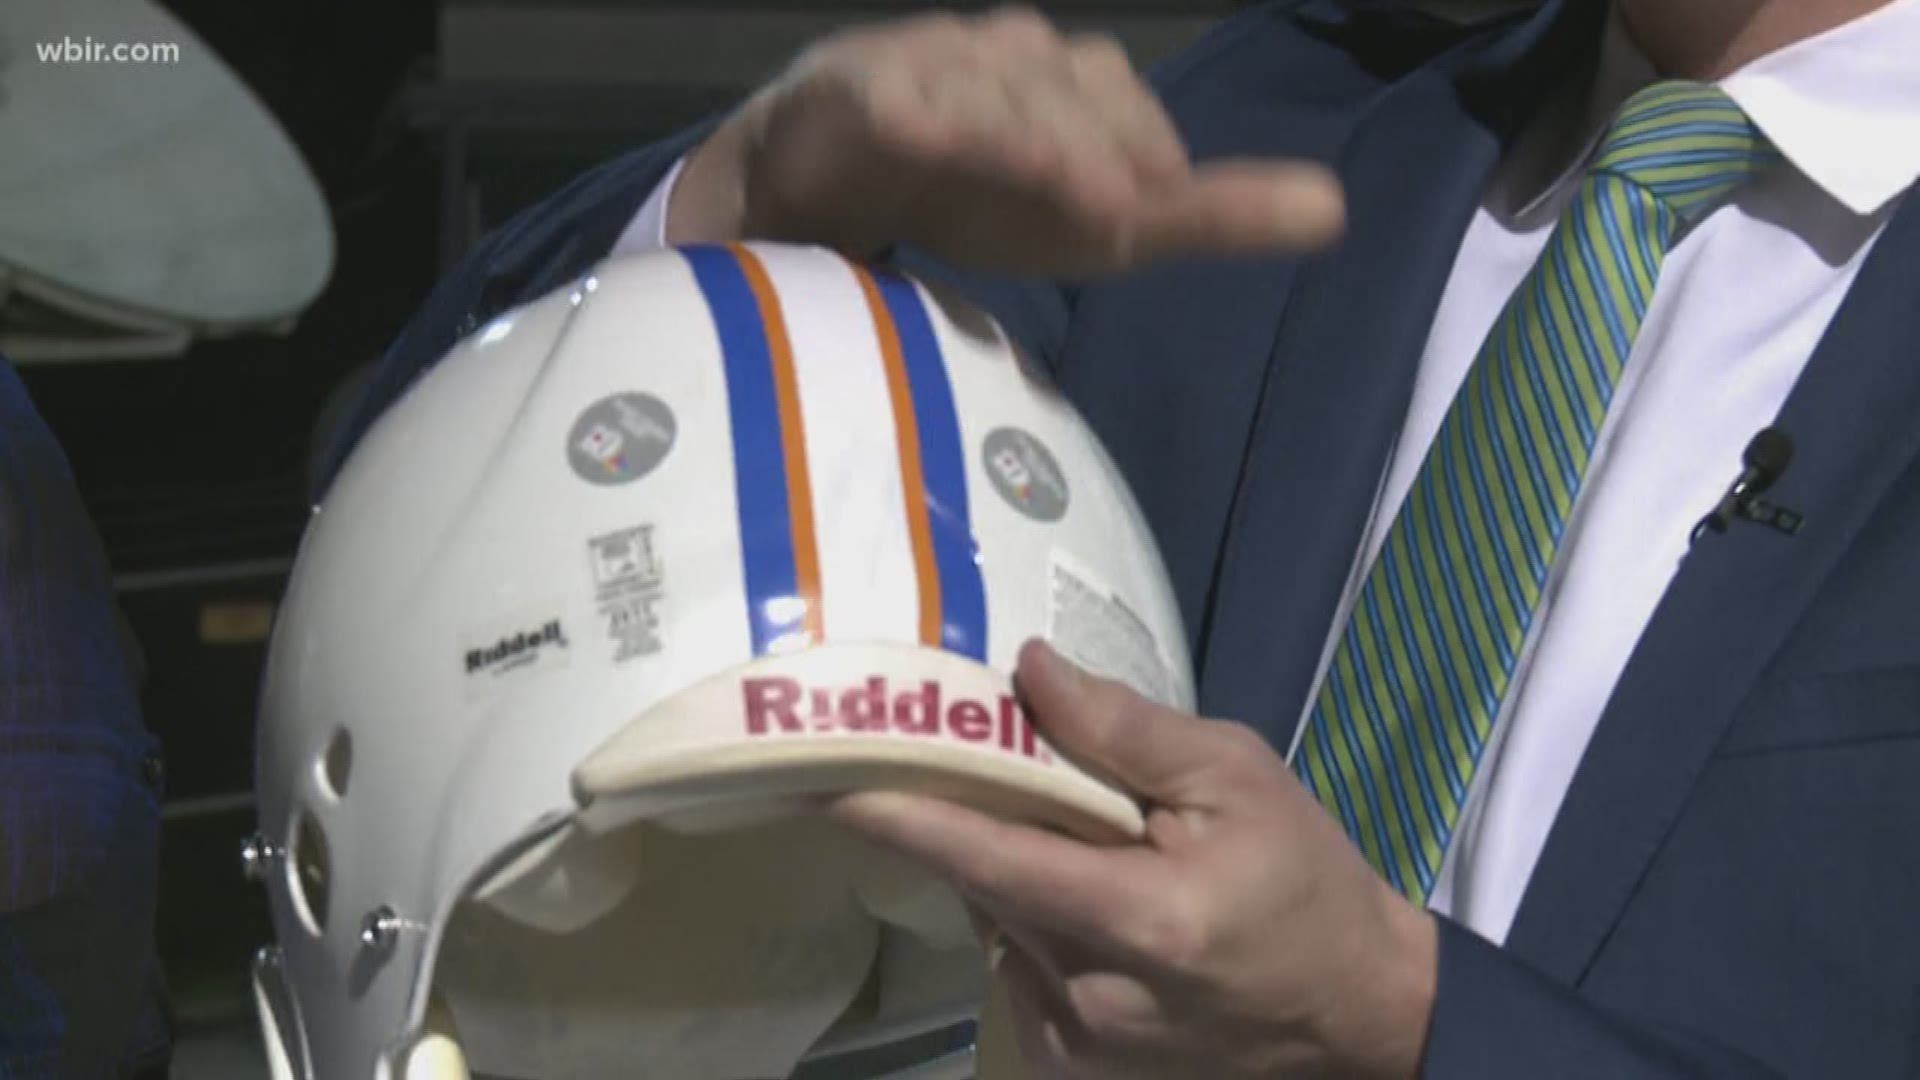 We give out helmet stickers for the impressive performances around the region.